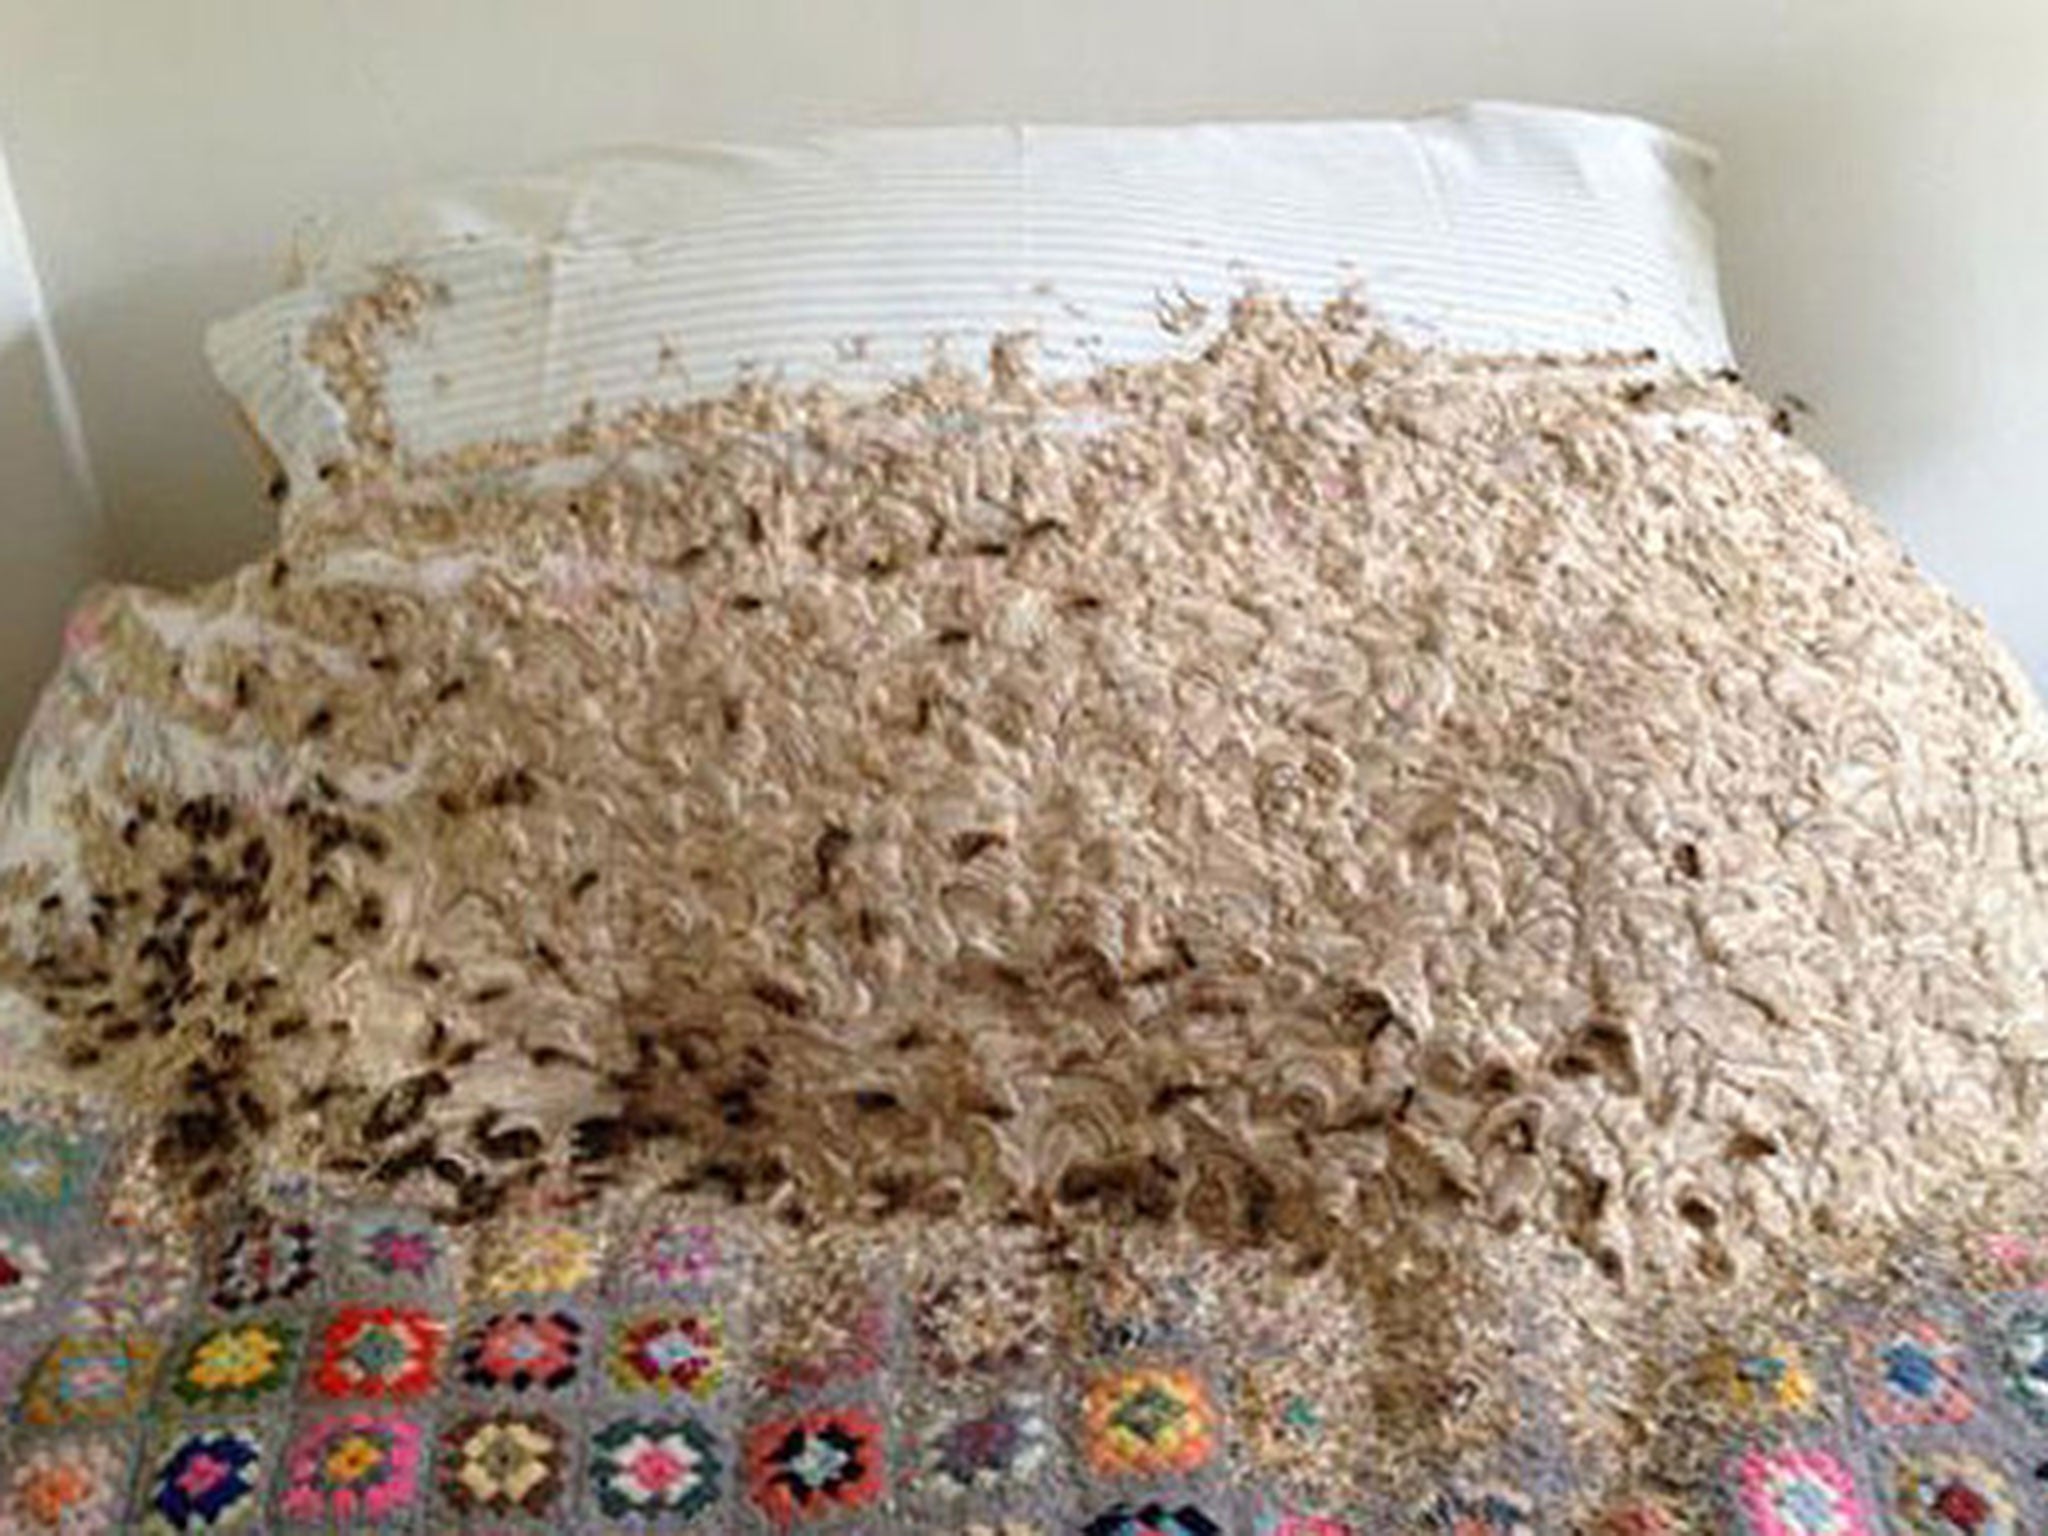 Enormous Wasps Nest Covering Bed Found In Woman S Spare